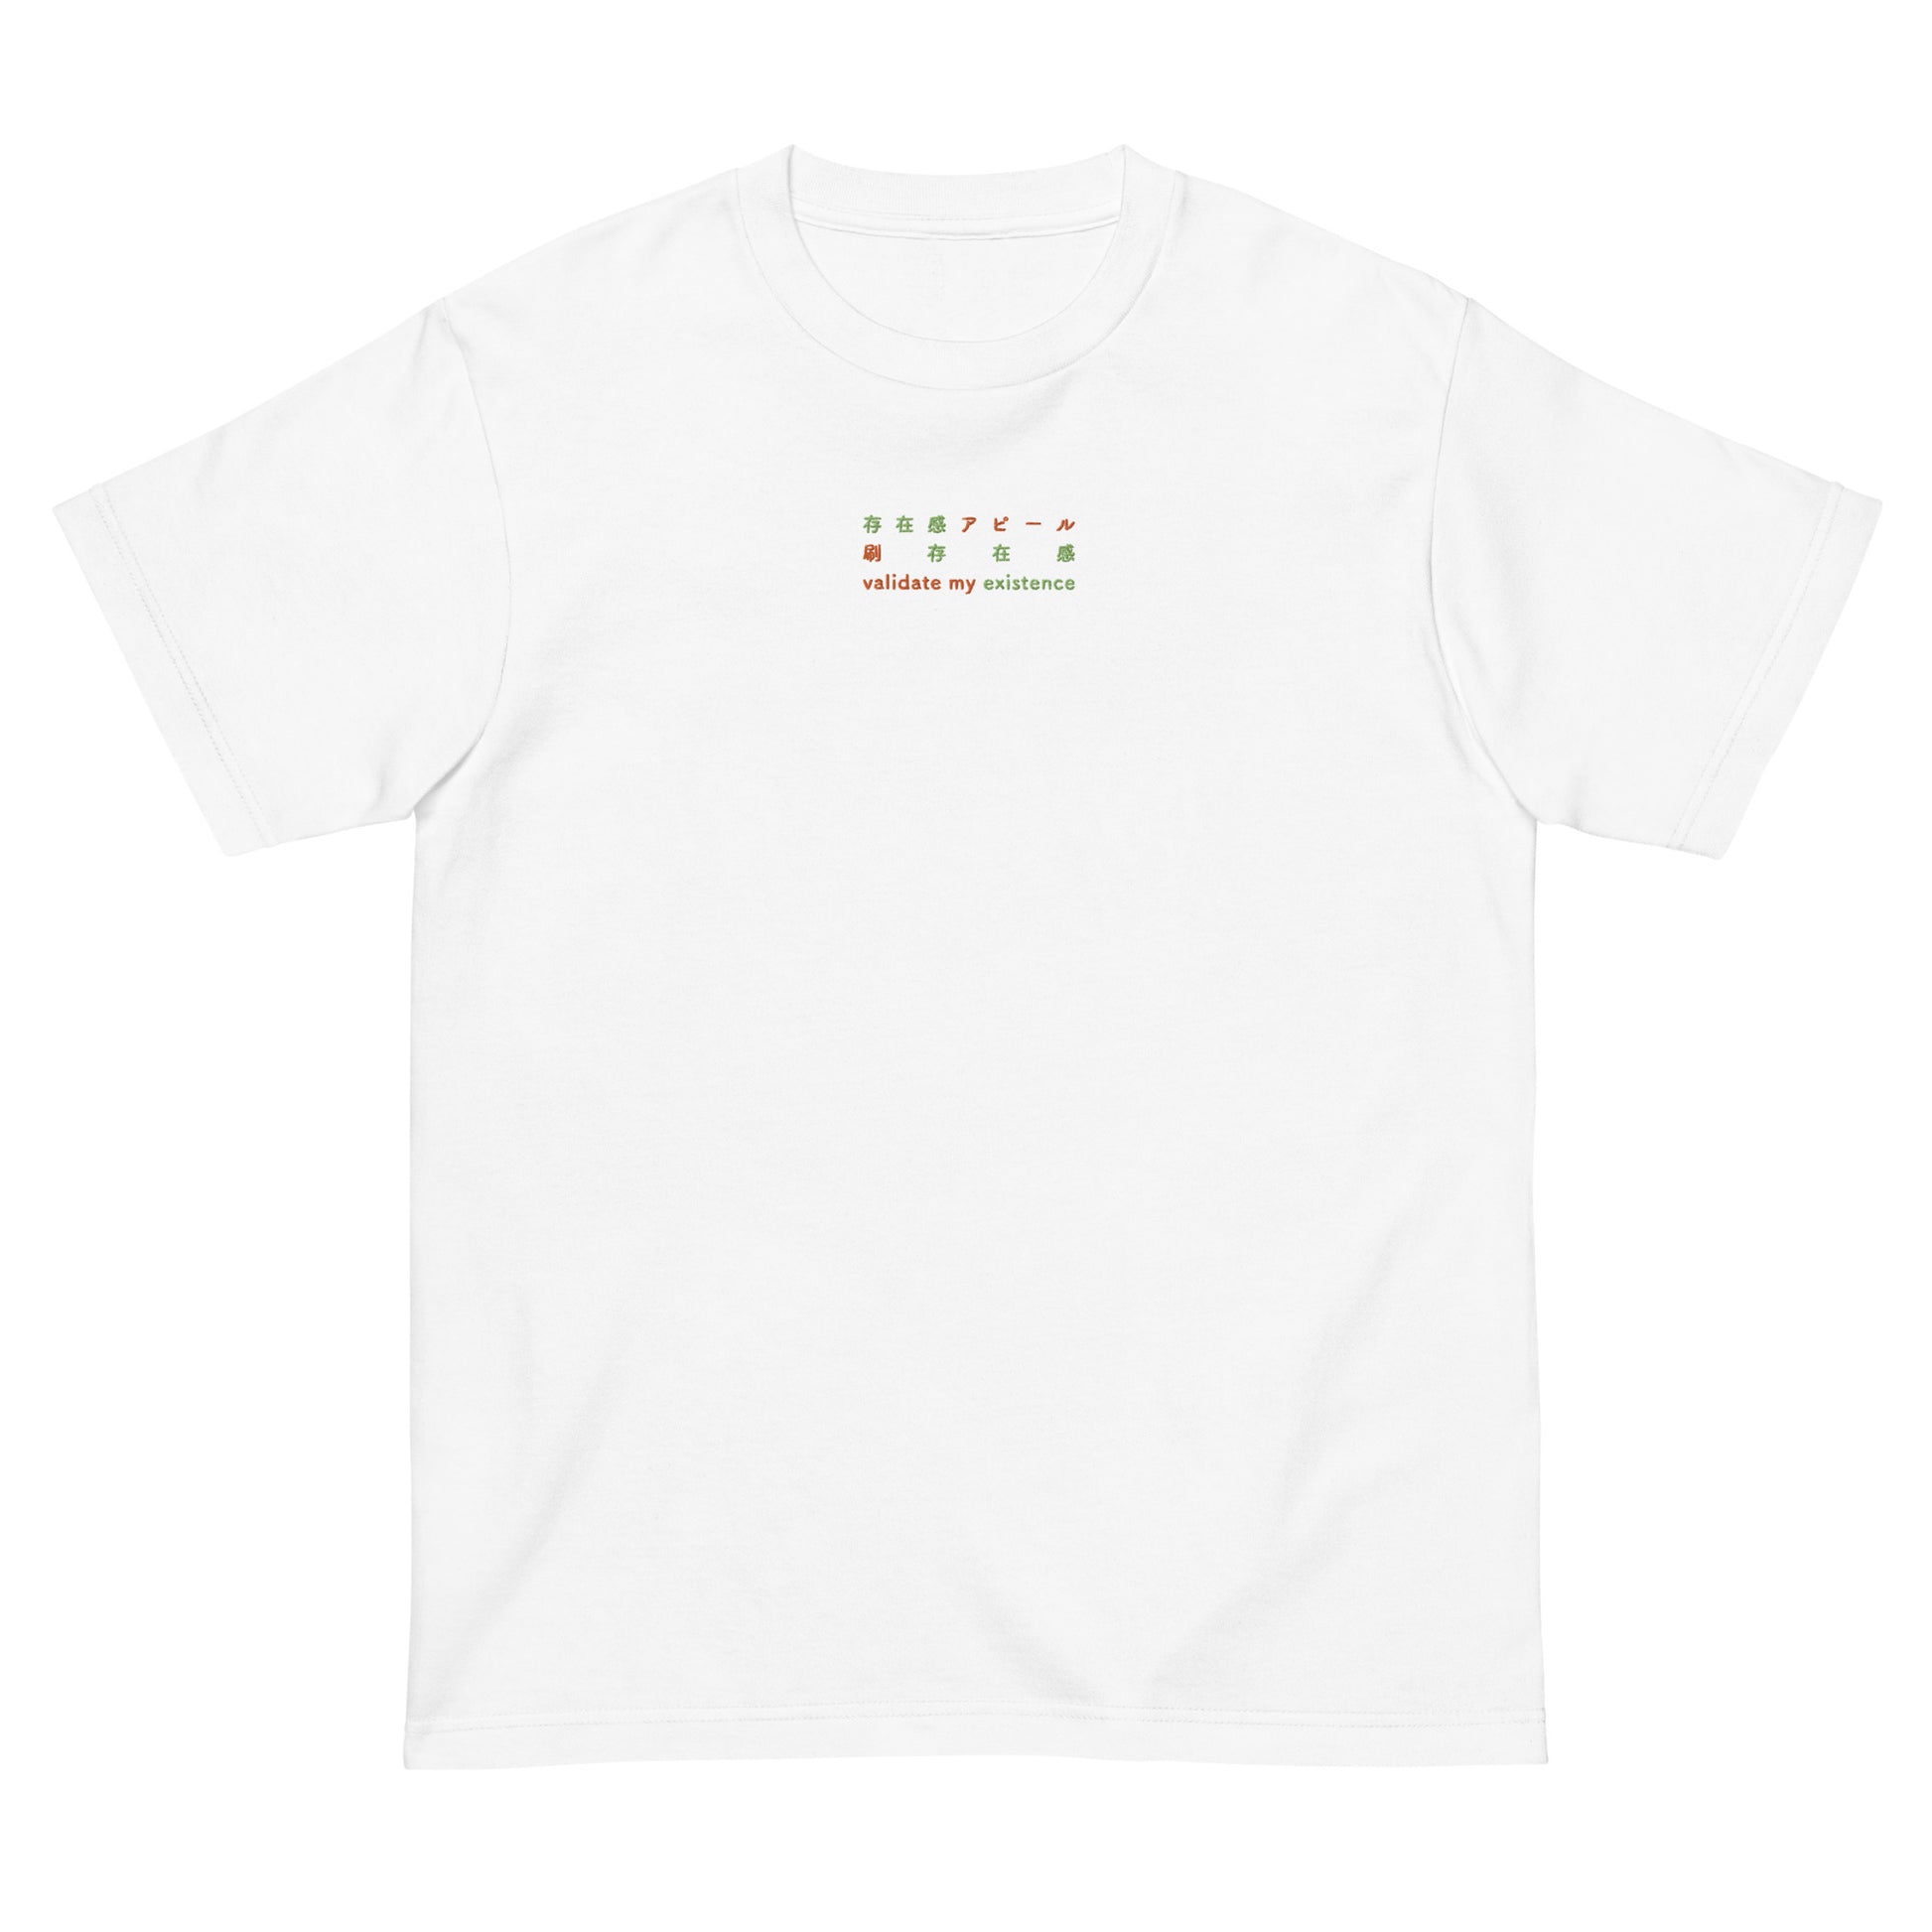 White High Quality Tee - Front Design with an Orange,Green Embroidery "Validate my Existence" in Japanese,Chinese and English